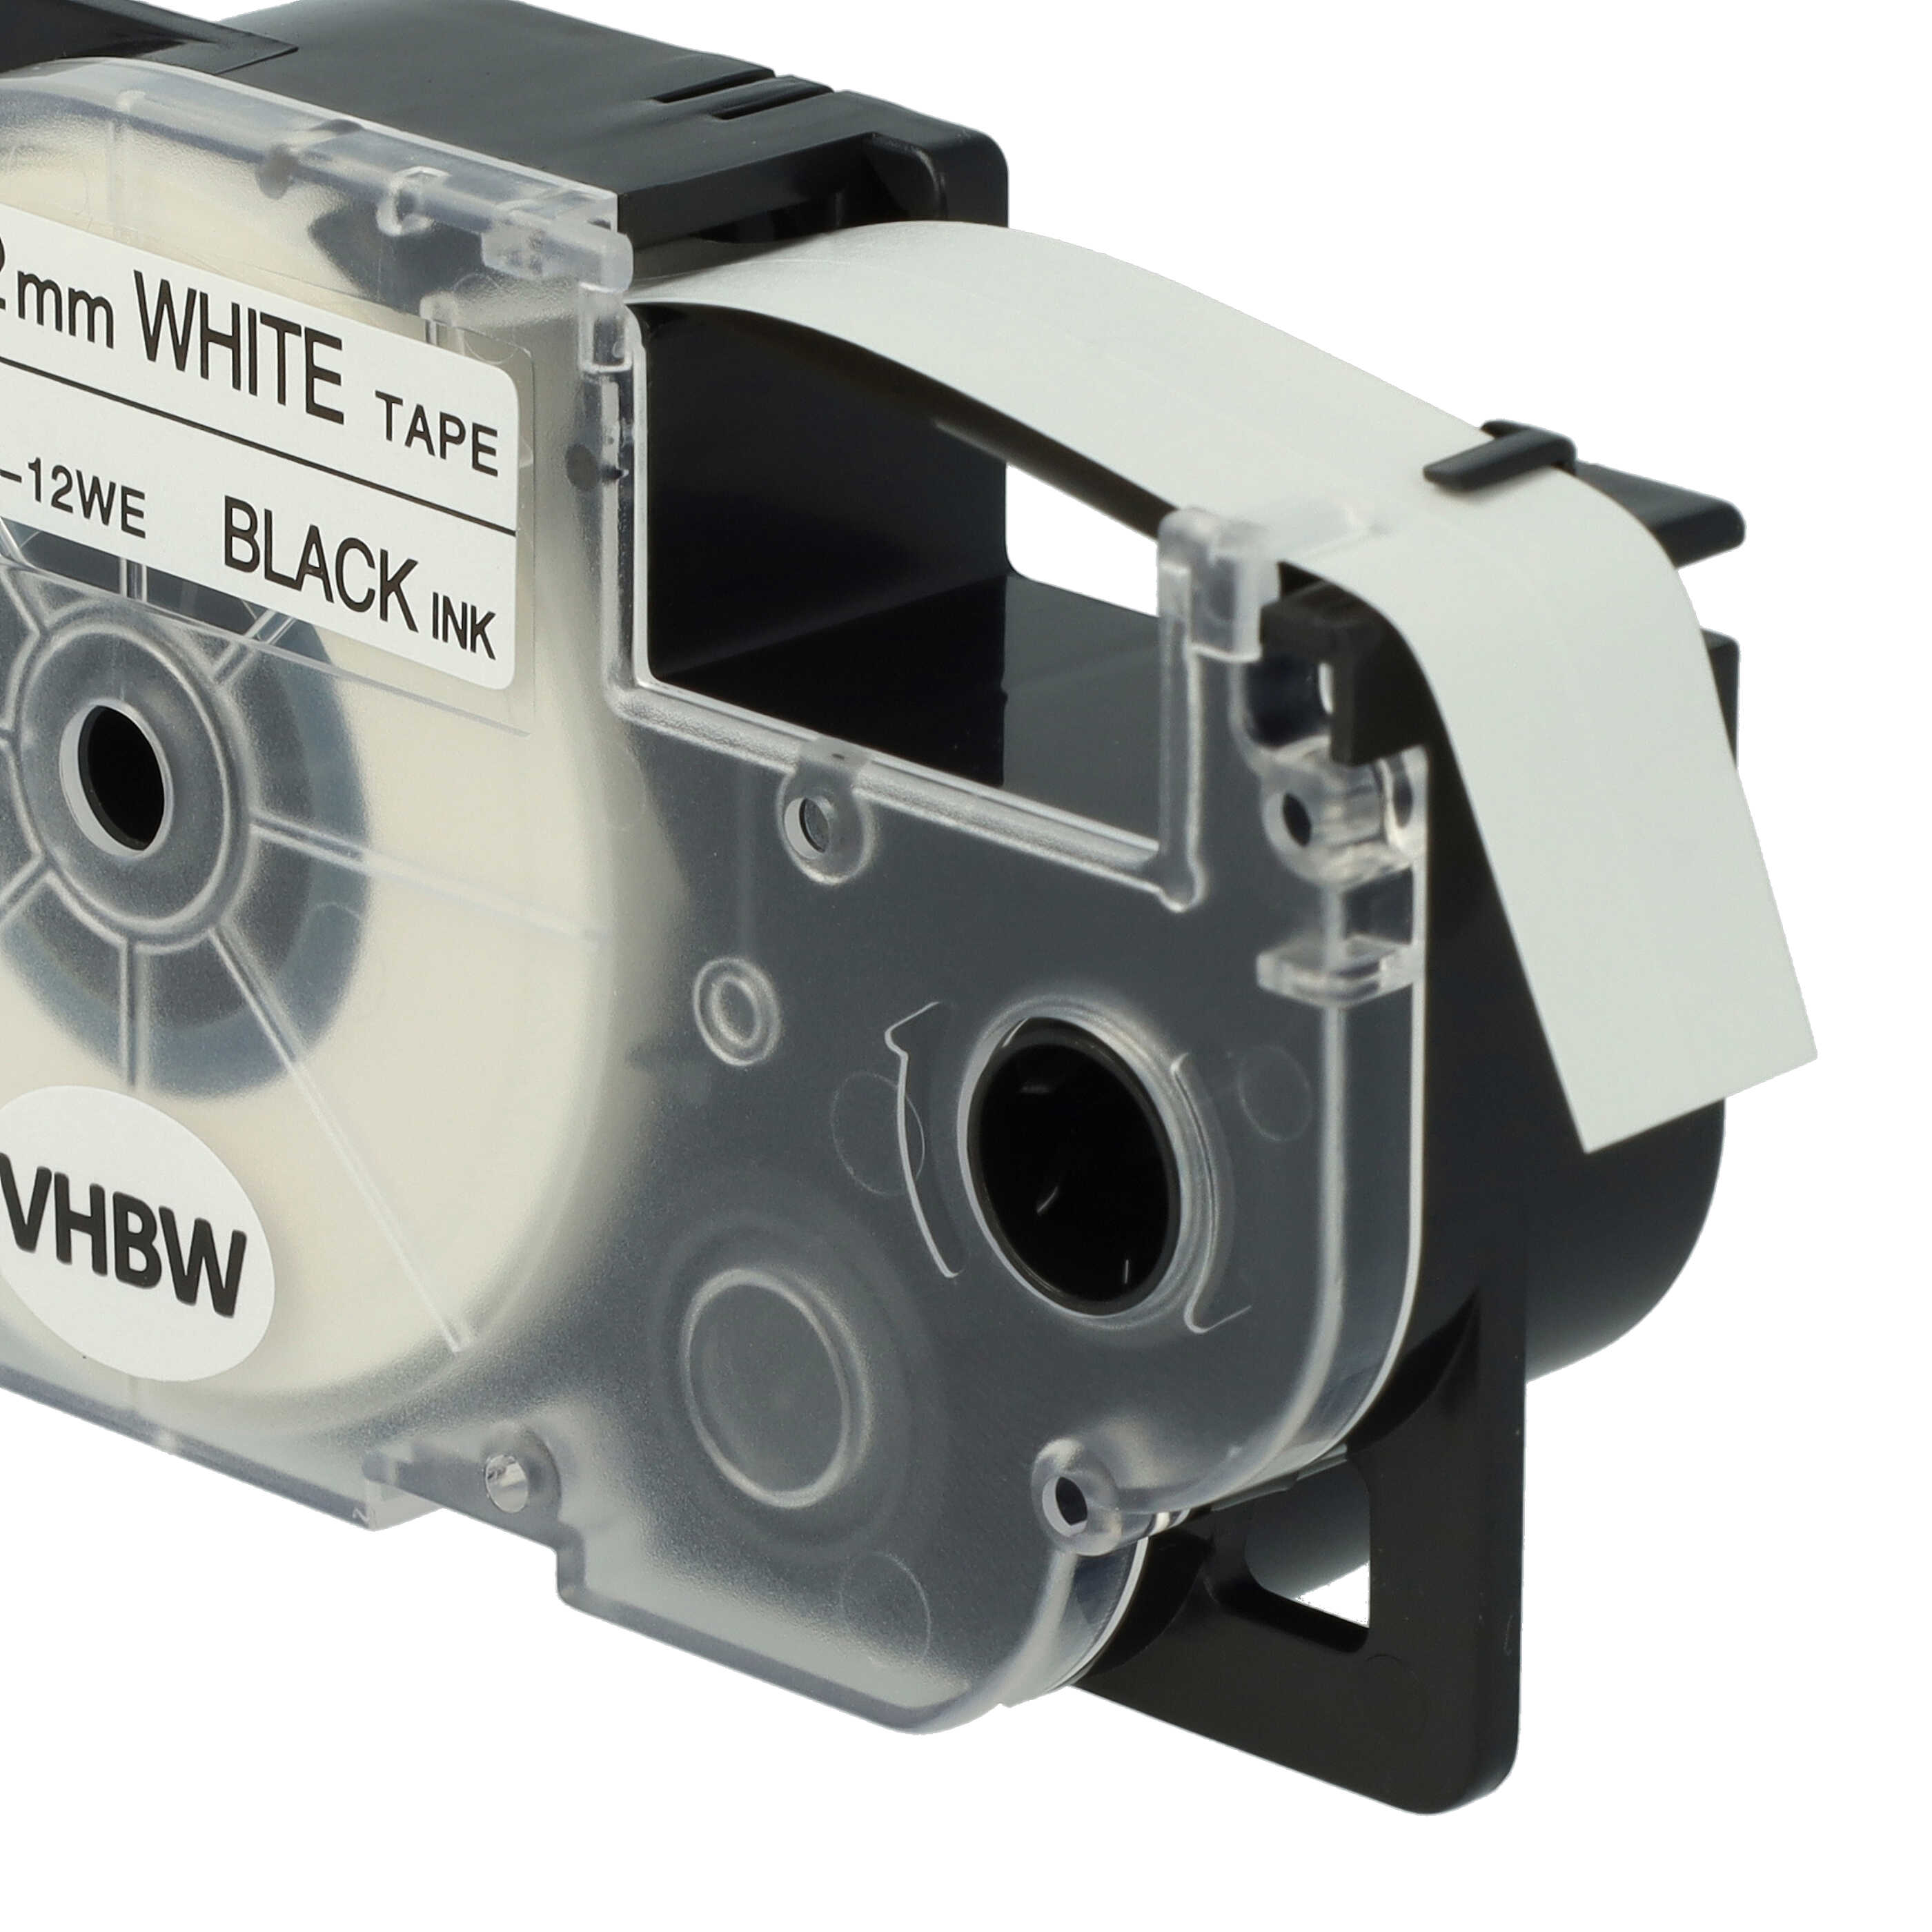 5x Label Tape as Replacement for Casio XR-12WE, XR-12WE1 - 12 mm Black to White